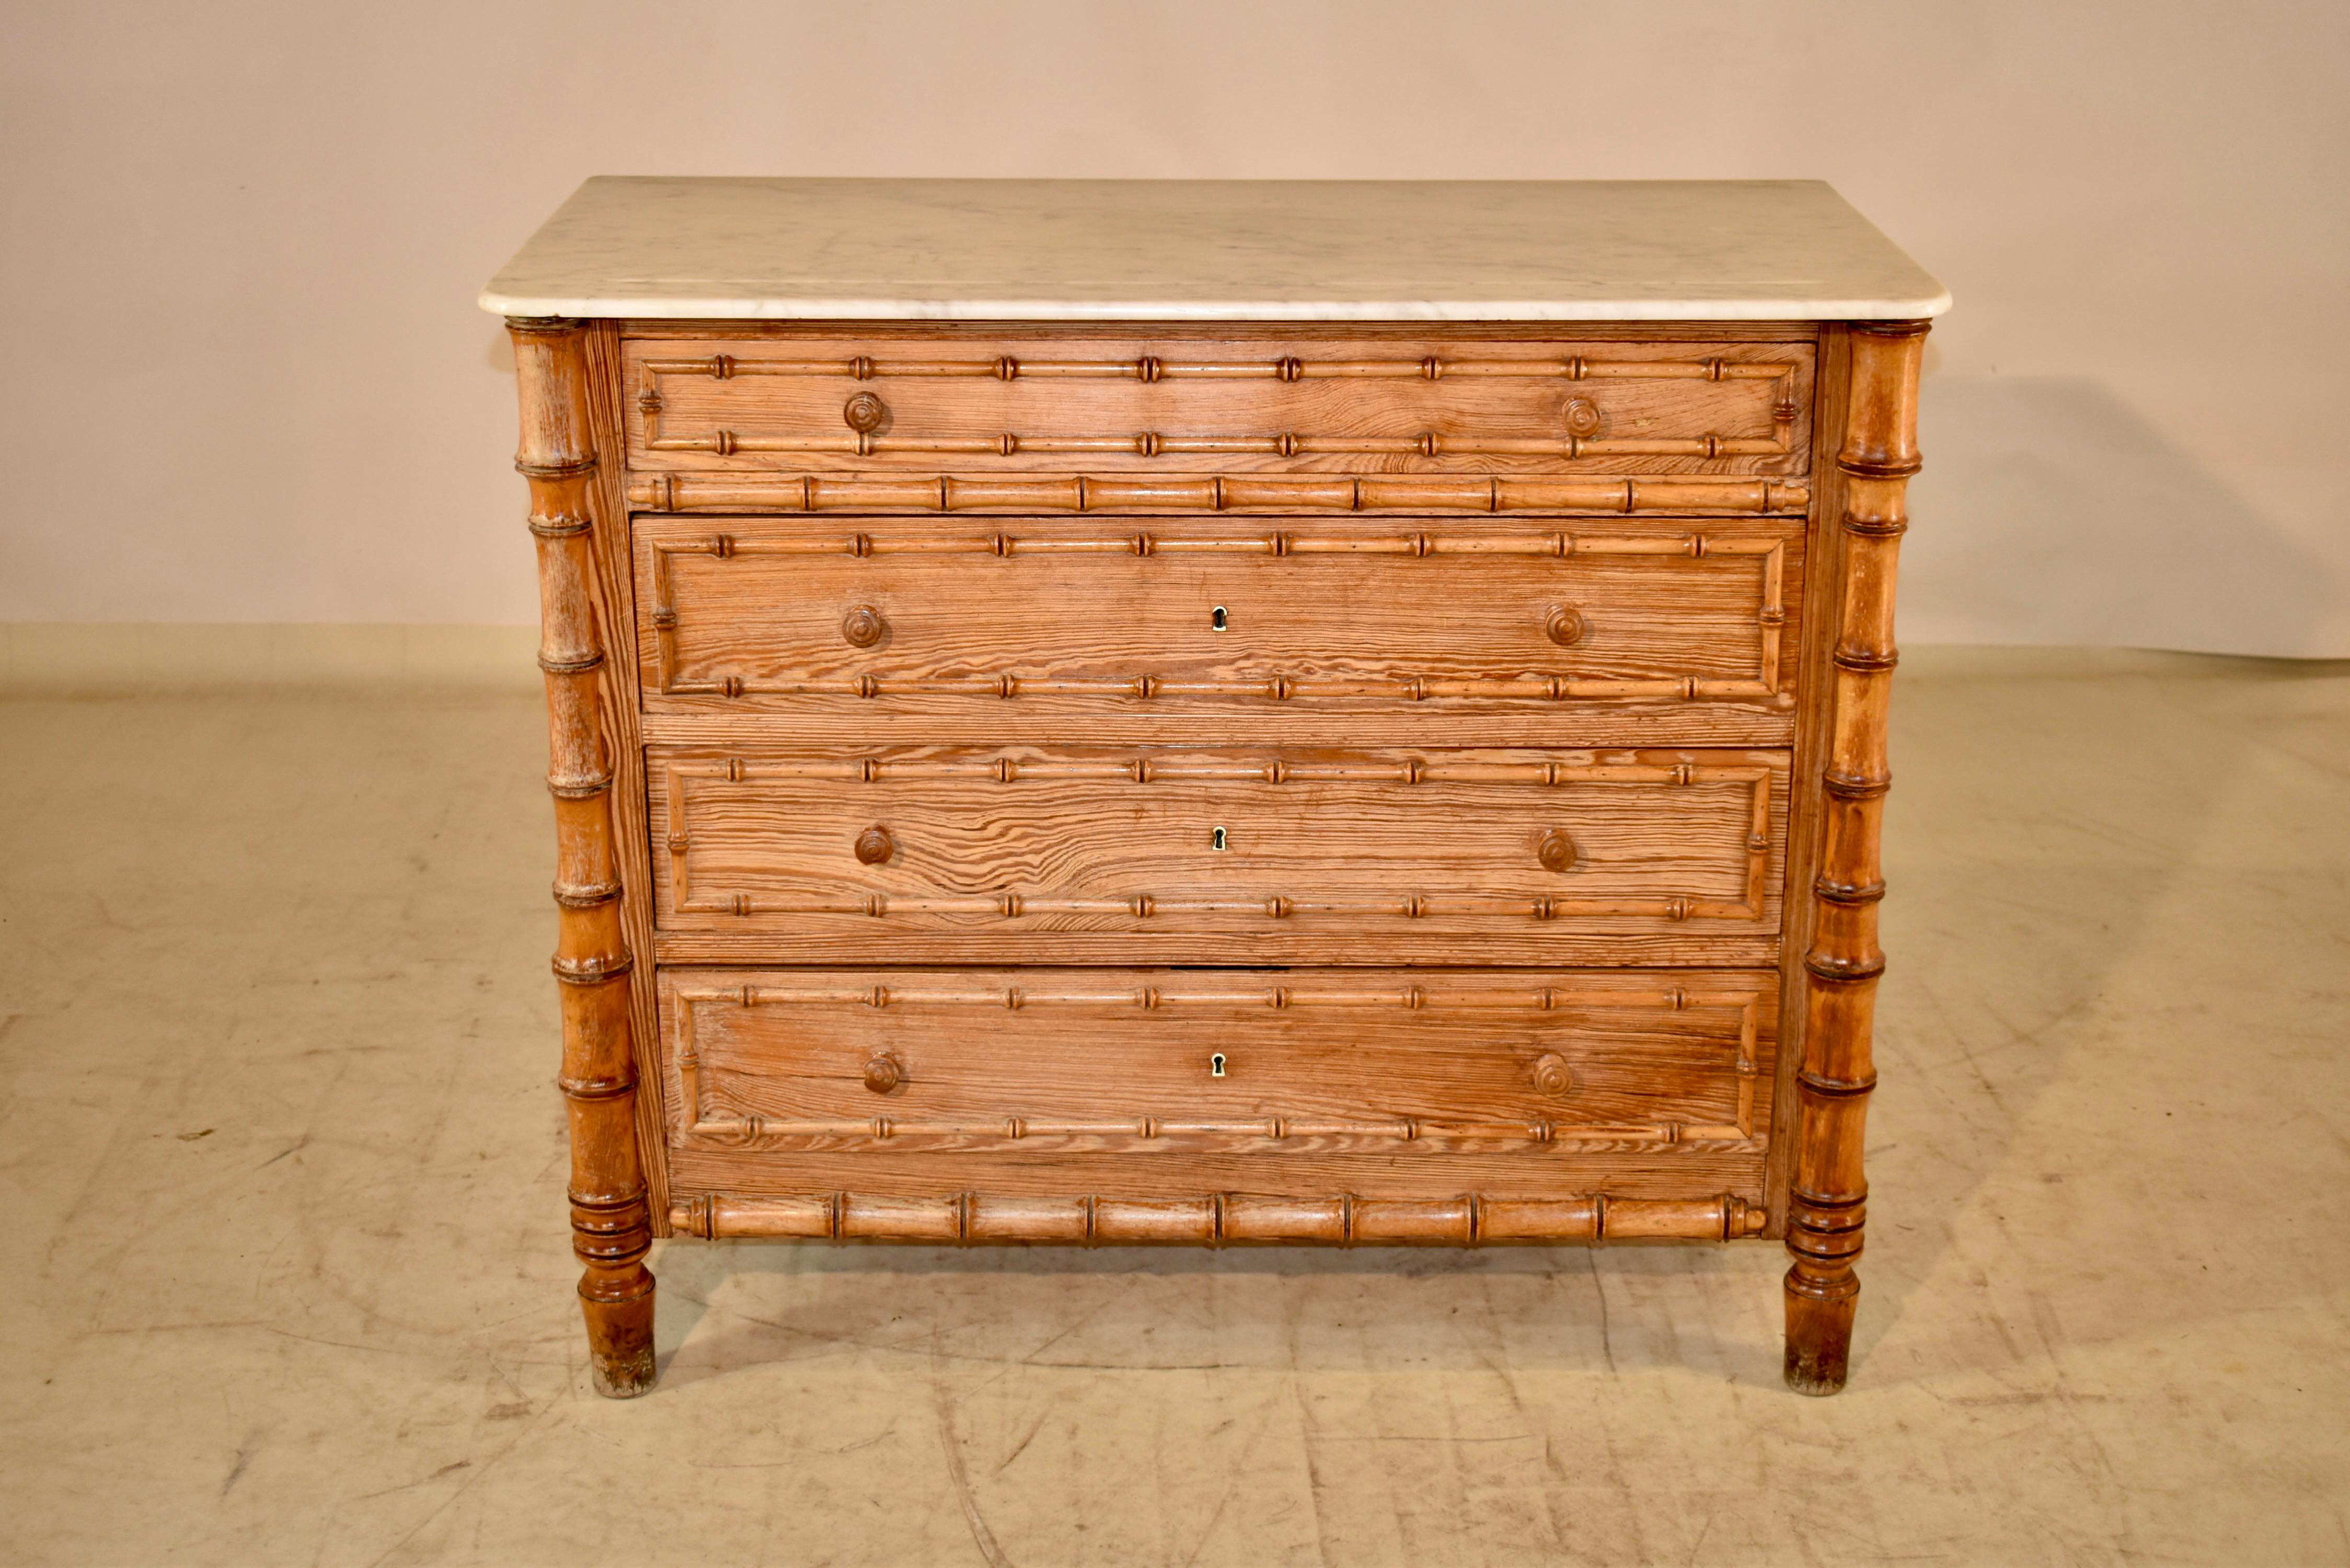 19th century pine and cherry faux bamboo chest of drawers from France. The top is original to the piece and is made from what appears to be carrara marble. The top is removable and sits on top of the case, which is made of pitch pine, and is